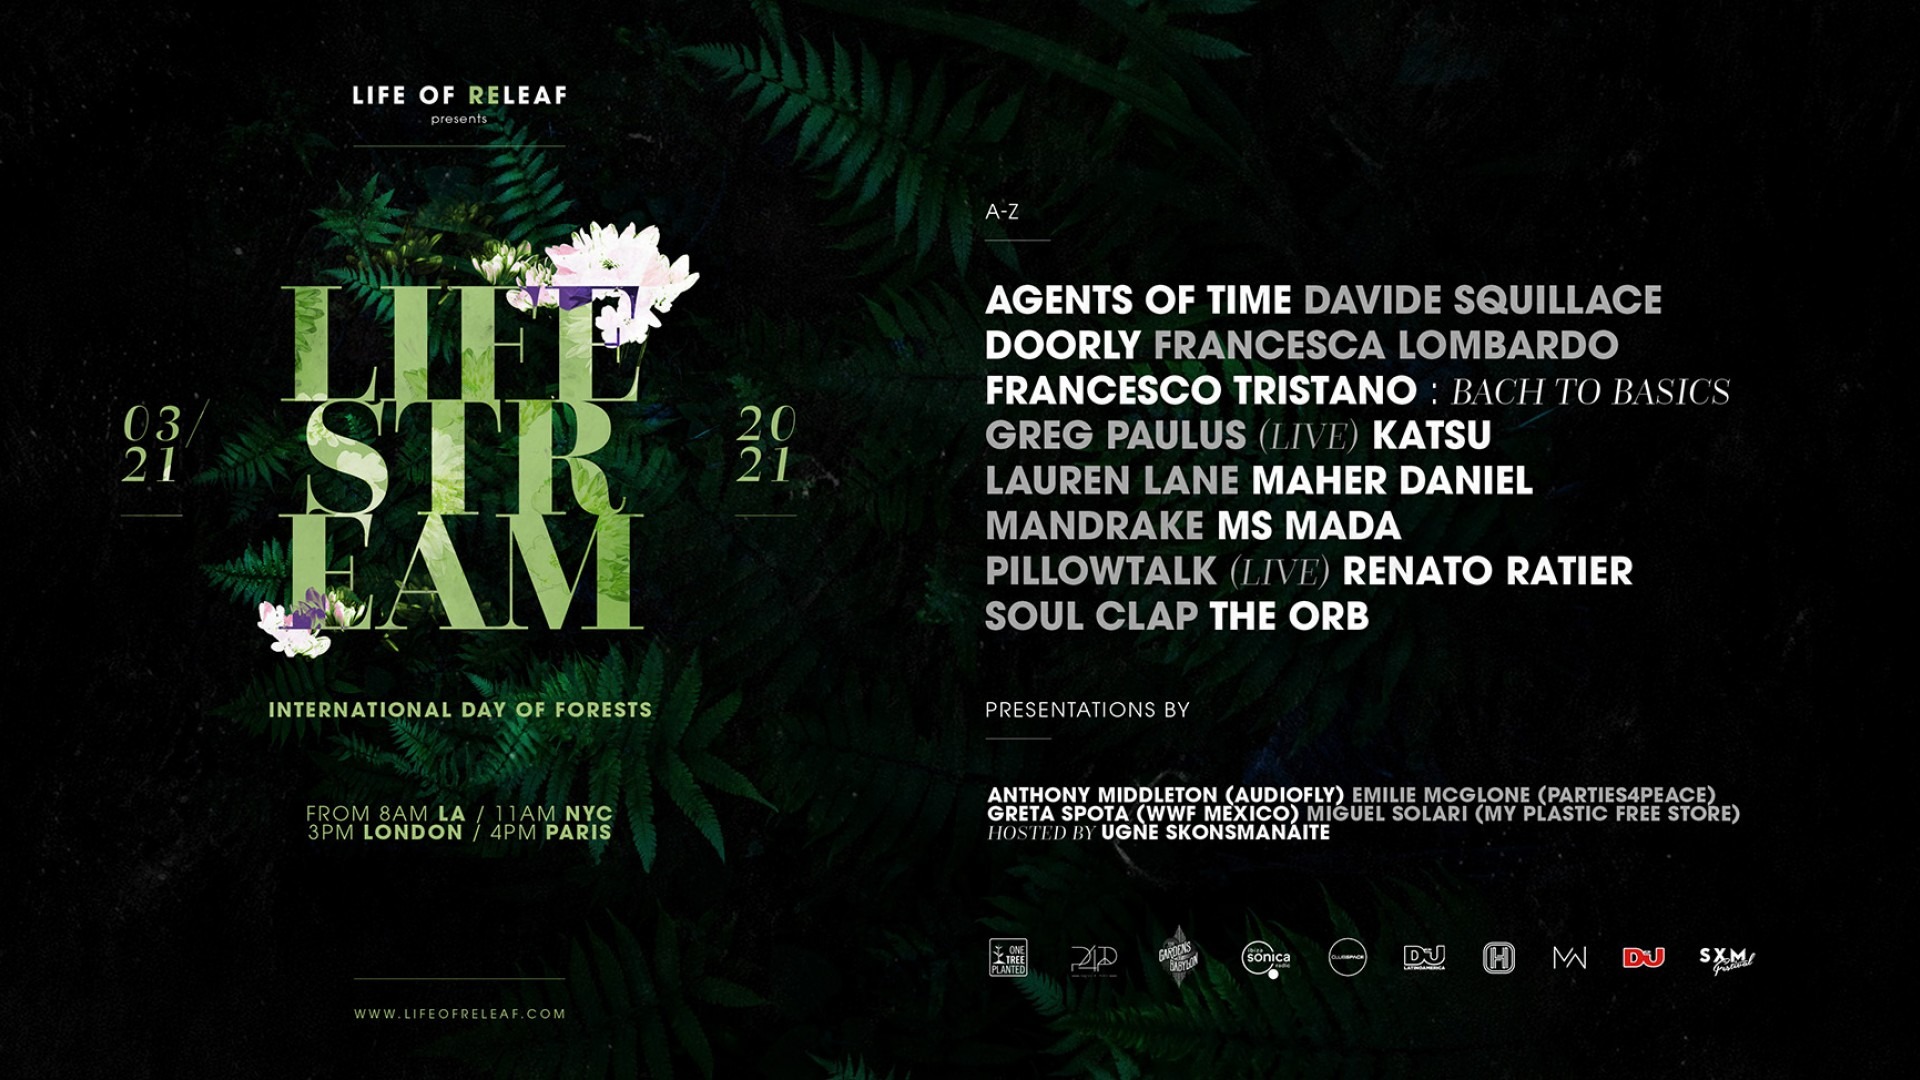 DJ Mag is supporting LIFE OF RELEAF with a 16-hour live stream on International Day Of Forests